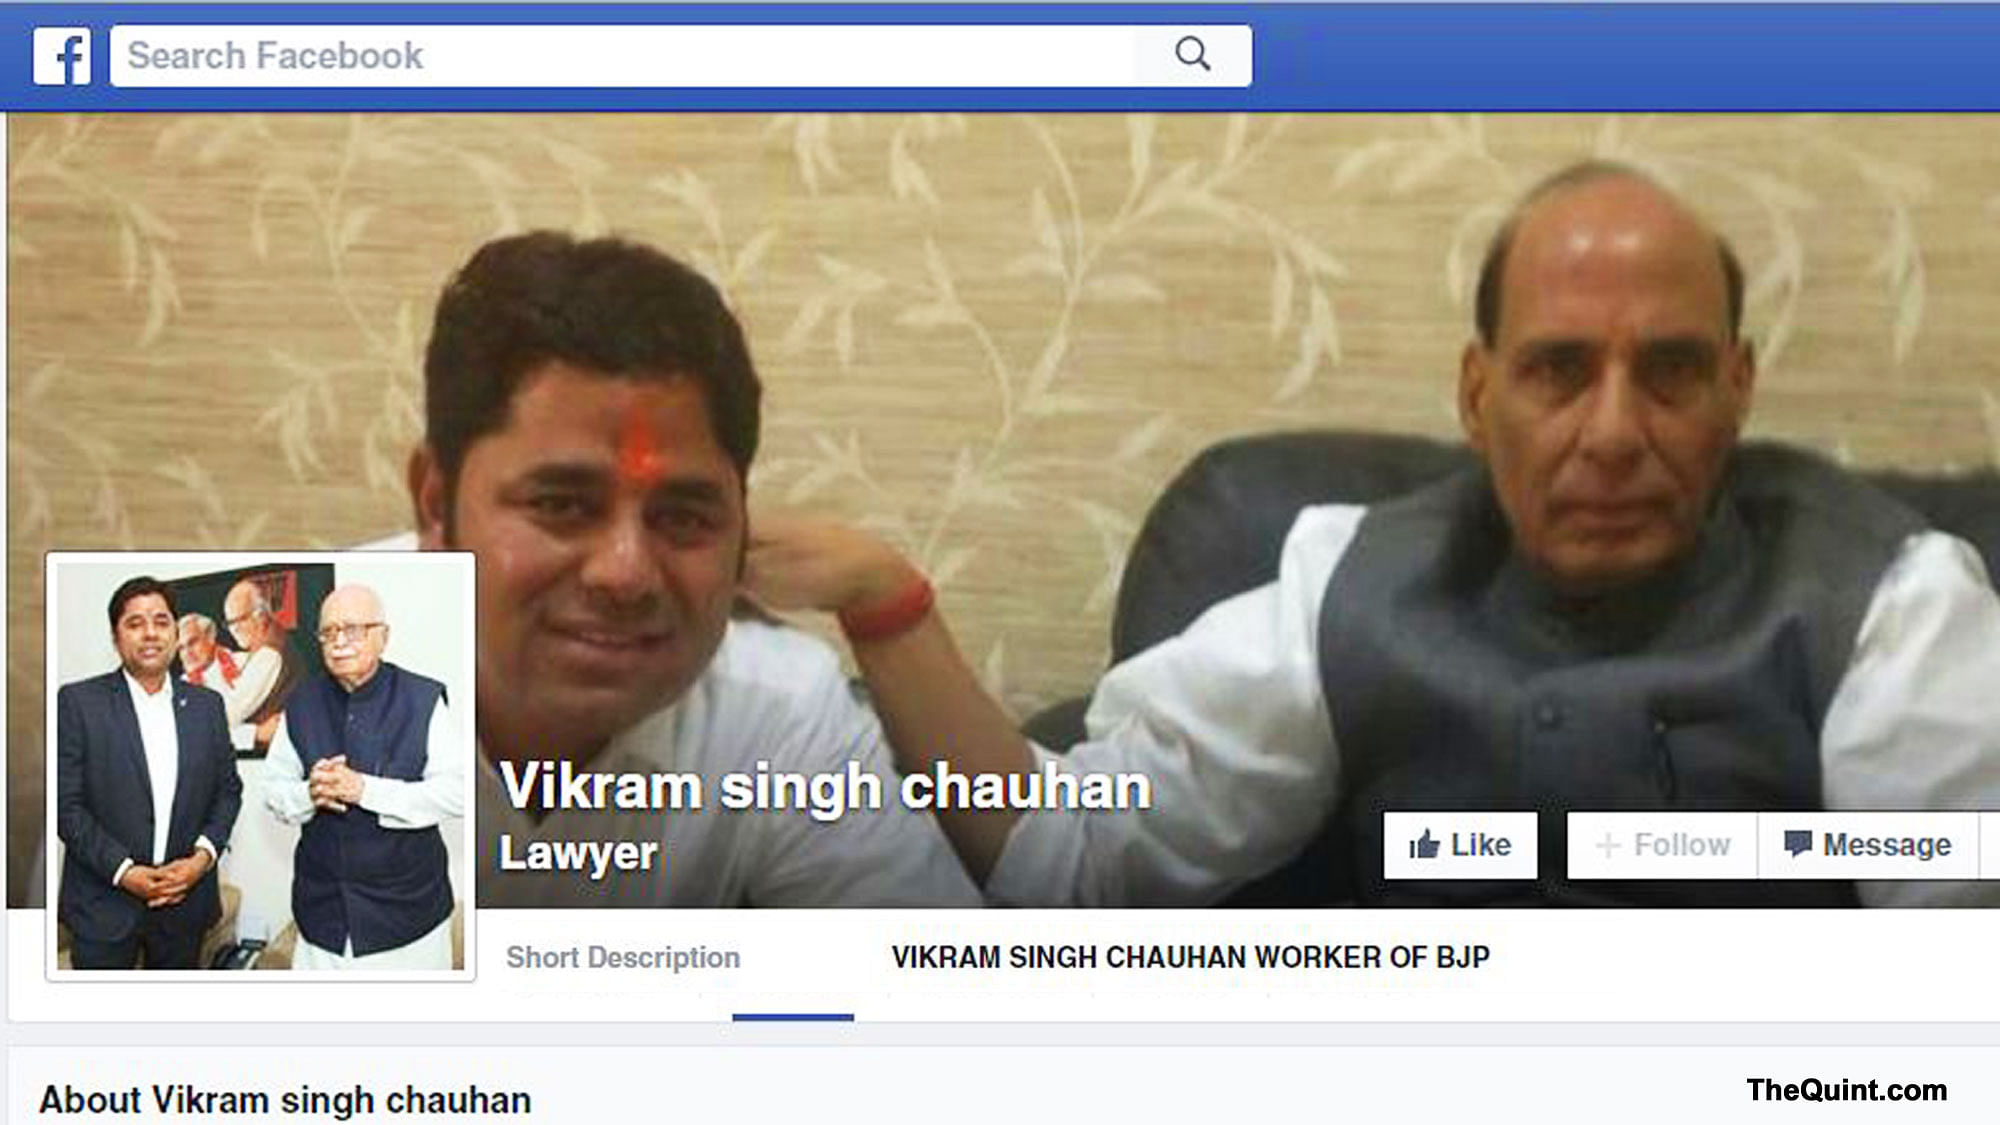 Vikram is a lawyer but prefers to be known as BJP’s party worker. (Photo: The Quint)